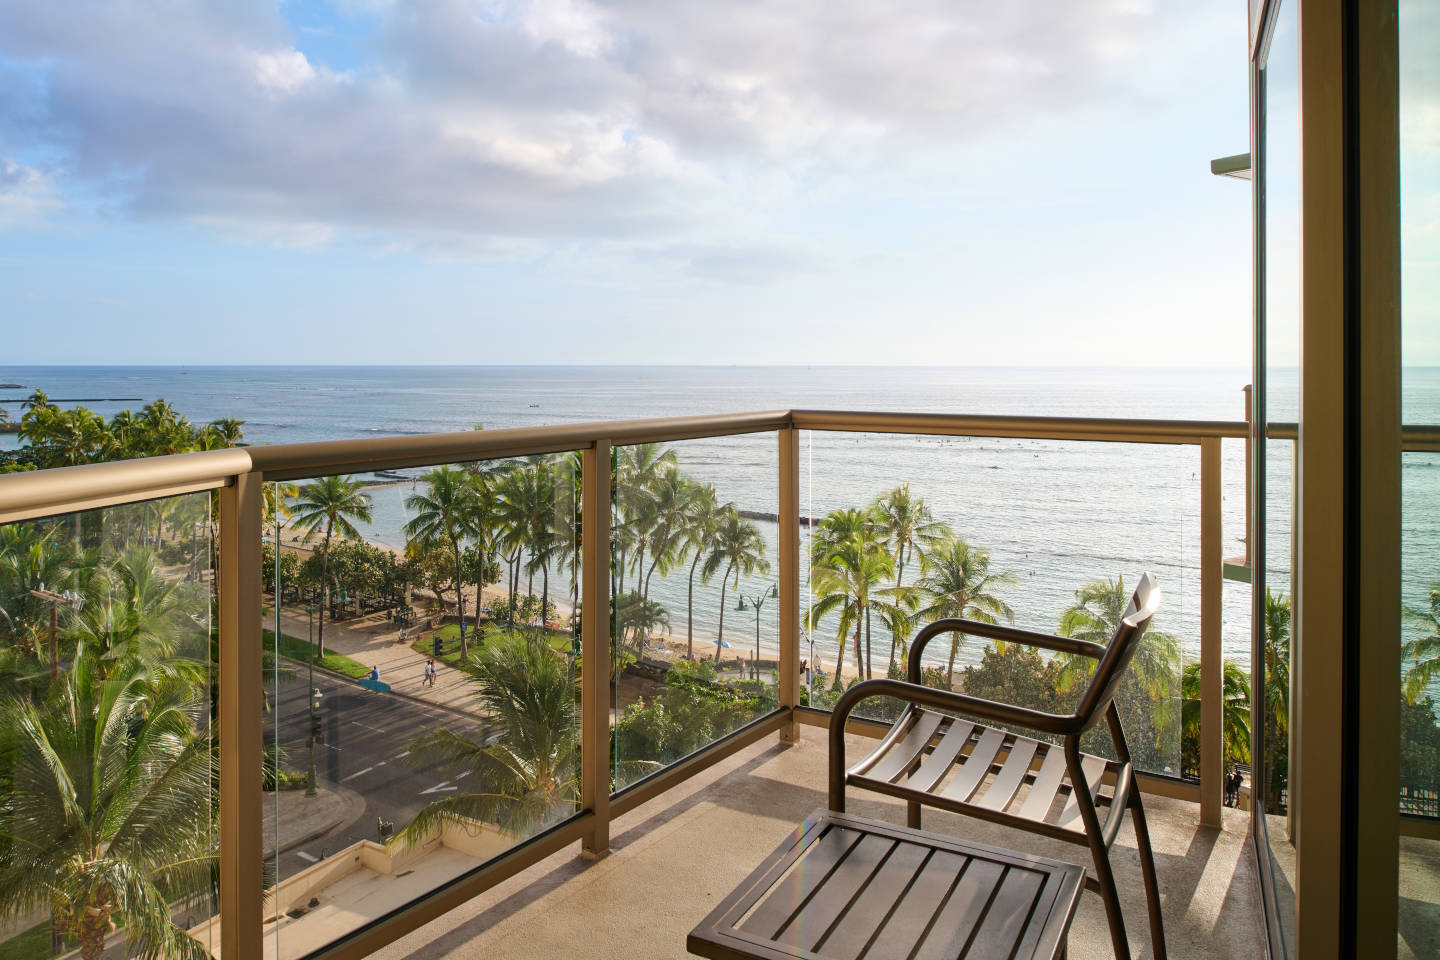 Ocean View Accessible Room Balcony with views of Waikiki Beach